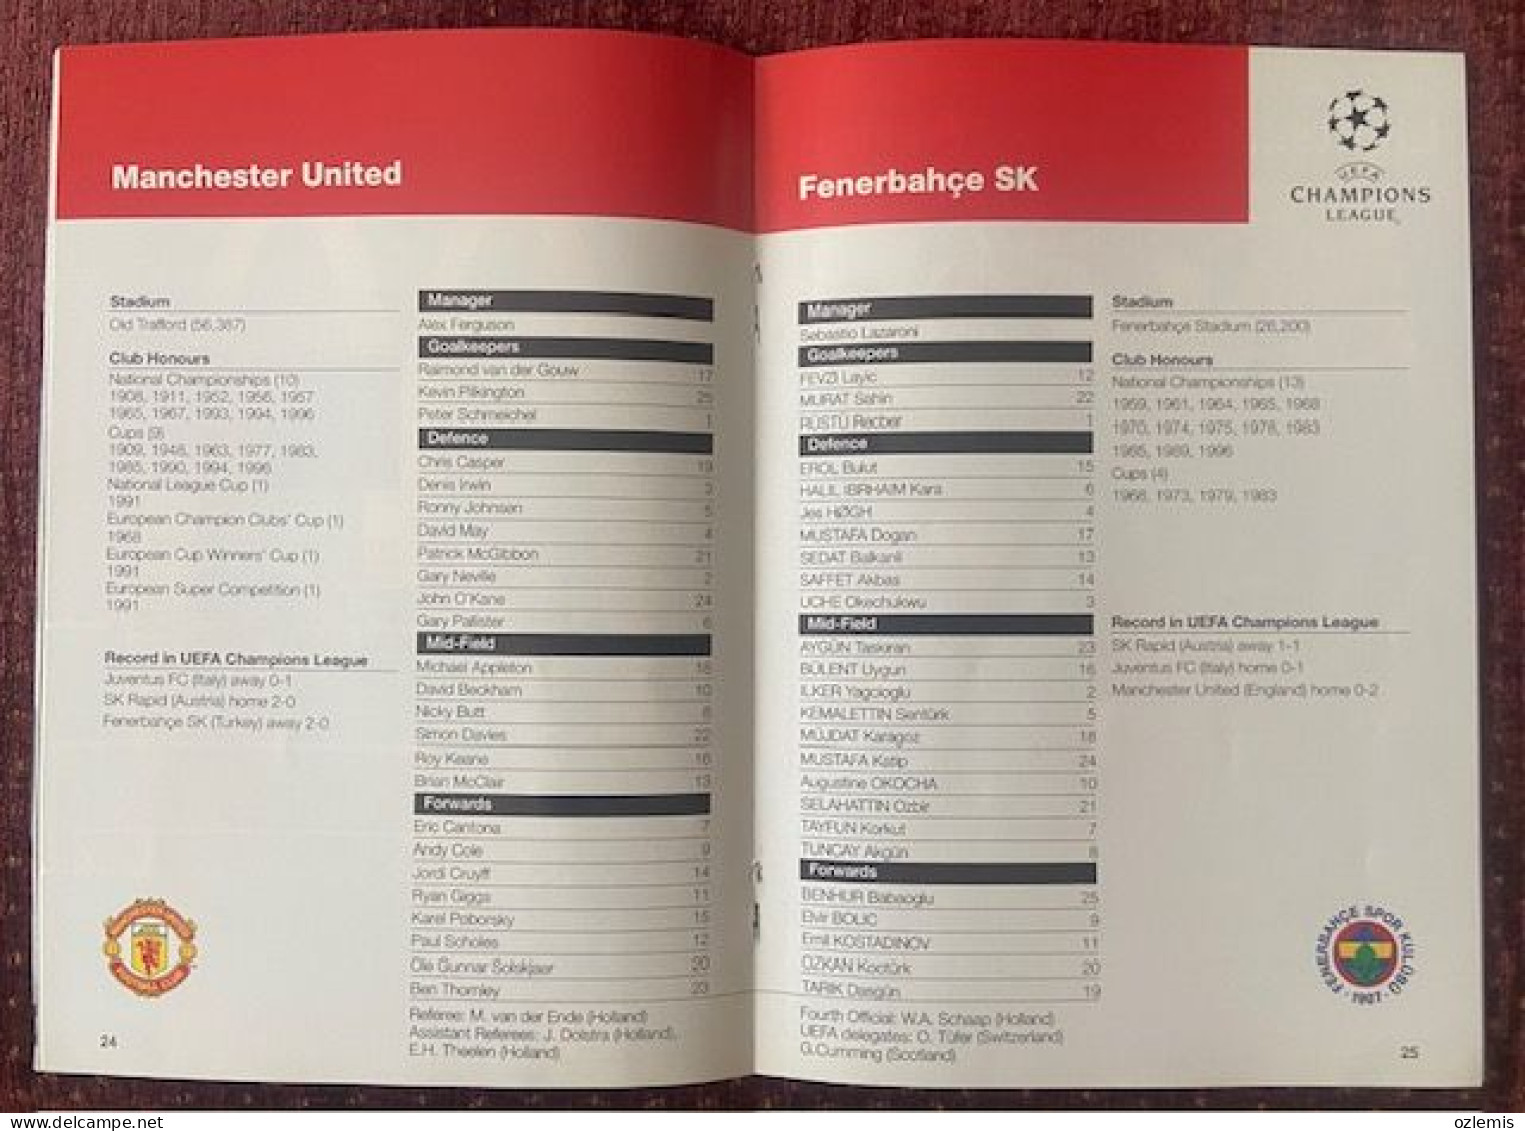 MANCHESTER UNITED- FENERBAHCE ,UEFA CHAMPIONS LEAGUE ,MATCH SCHEDULE ,1996 - Livres